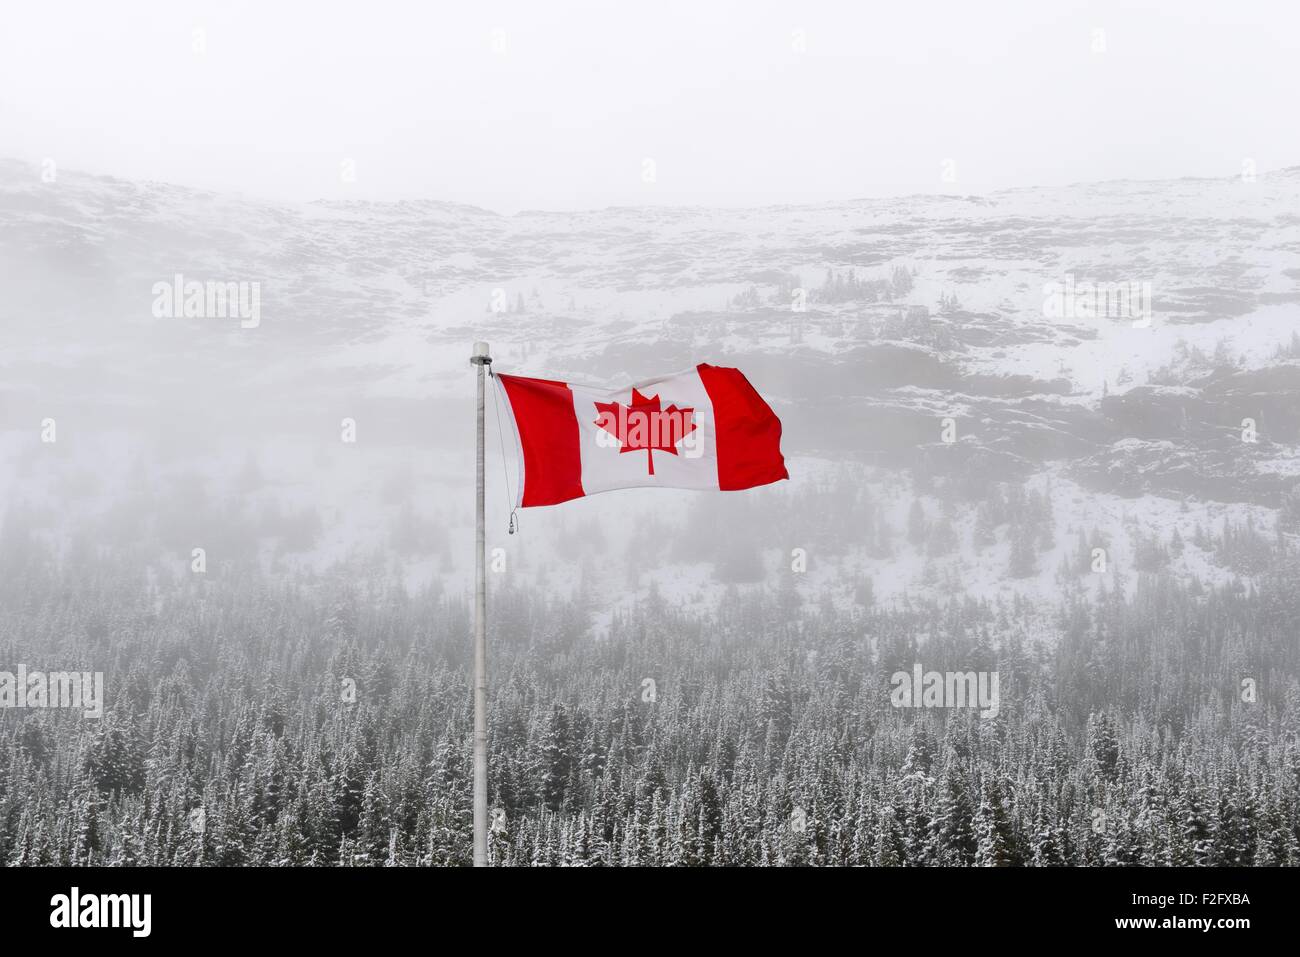 The Canadian national flag flying in the stiff wind during a snow shower in the Rocky mountains, Canada Stock Photo